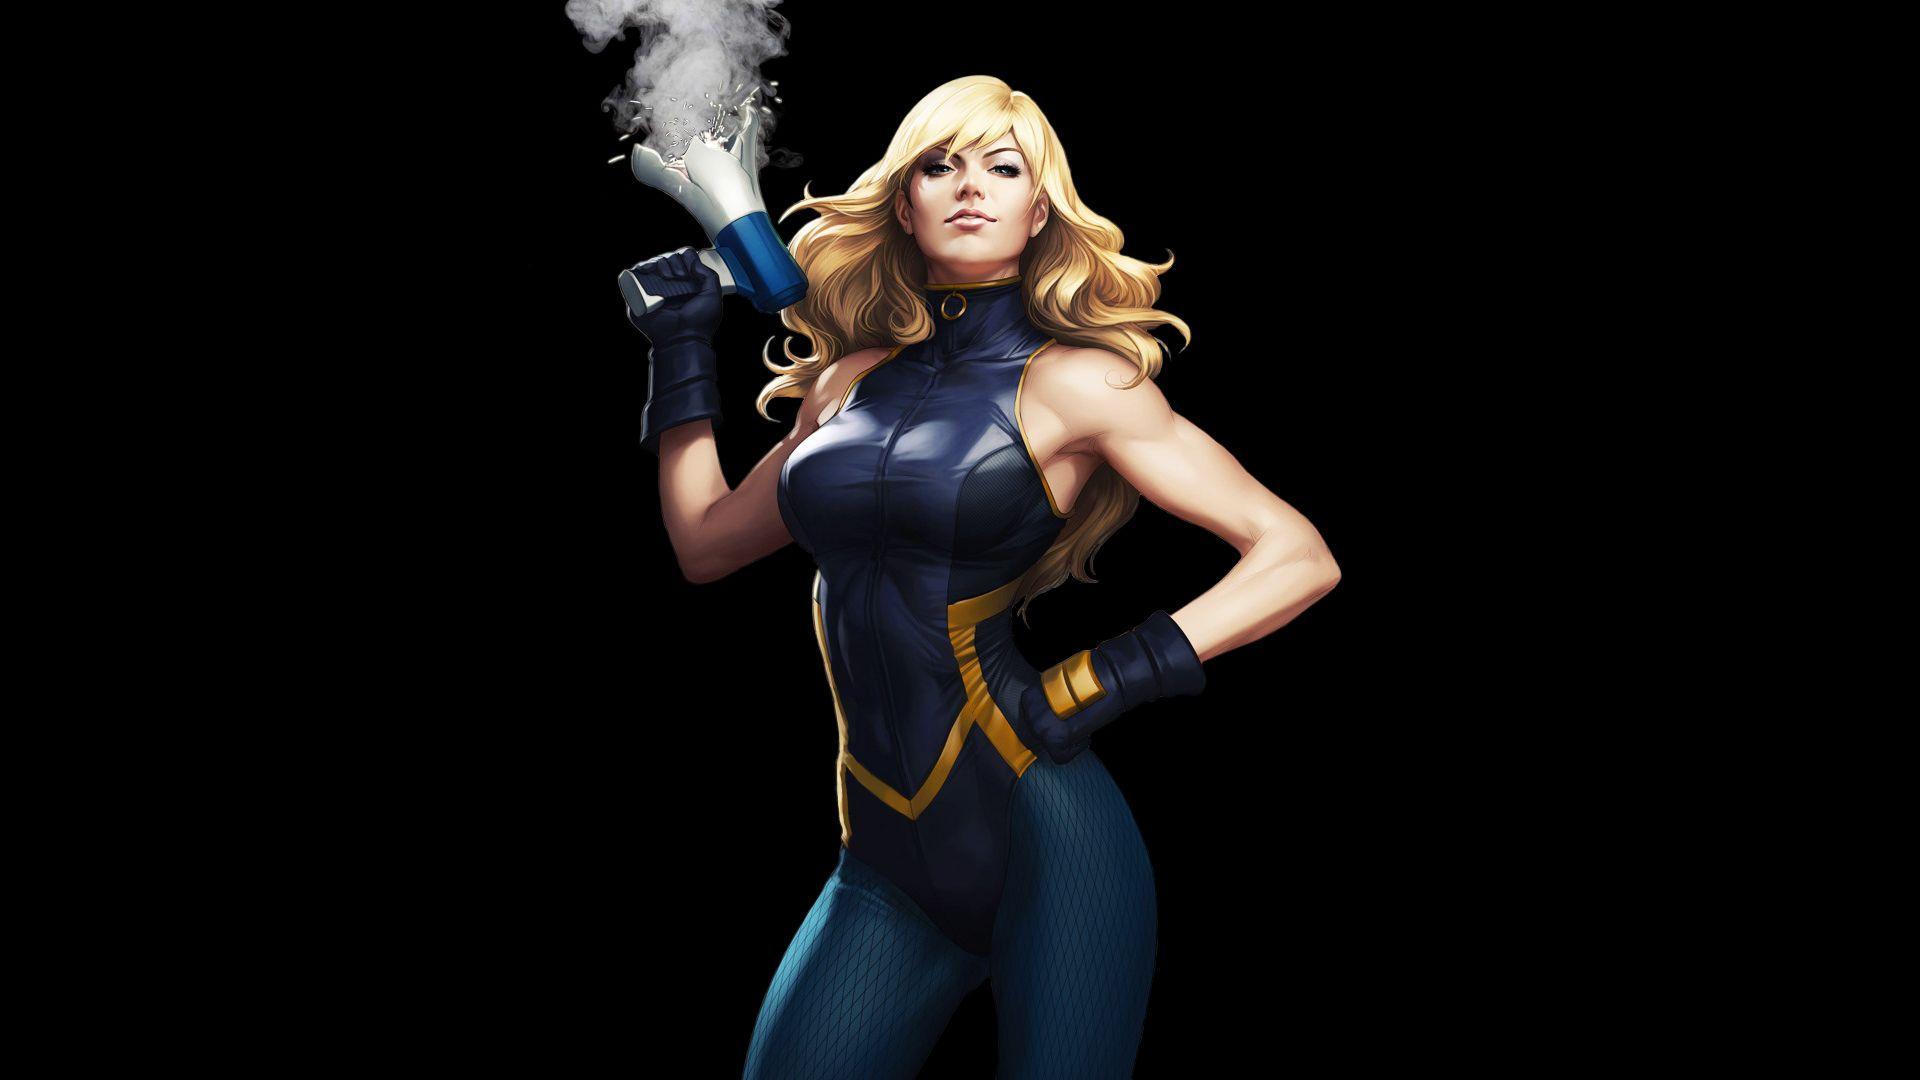 Black Canary Wallpapers Top Free Black Canary Backgrounds Wallpaperaccess You can also upload and share your favorite black canary wallpapers. black canary wallpapers top free